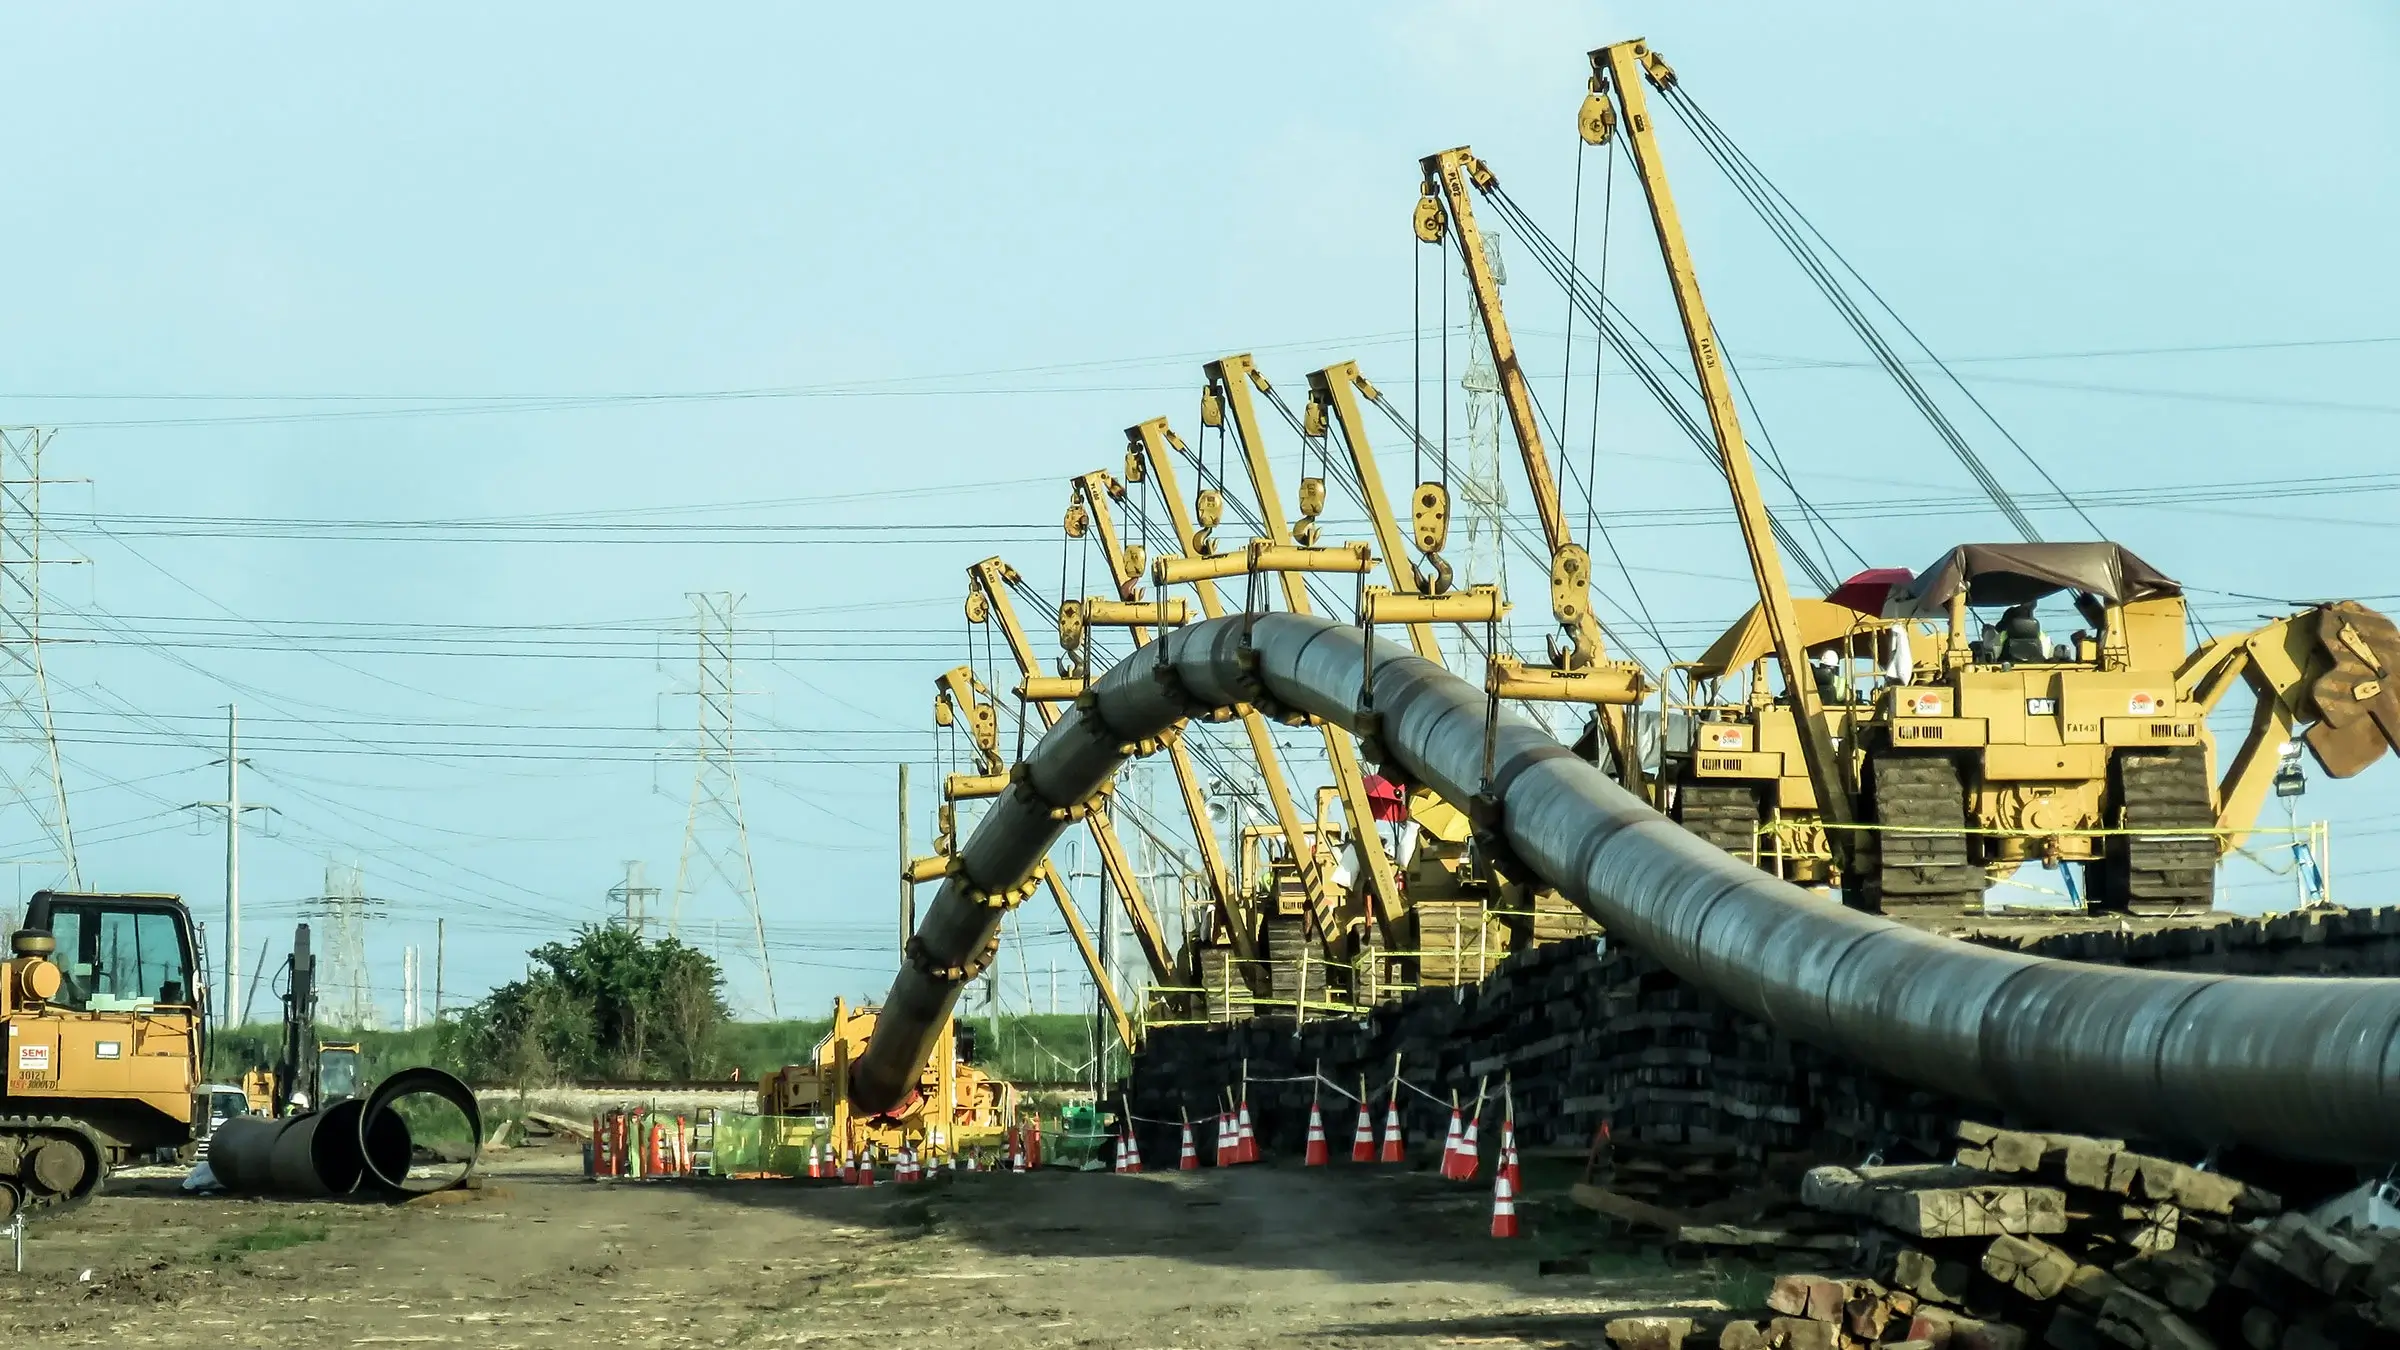 A group of pipe-layer machines hoist a large pipeline in the air leading to a Direct Pipe rig.